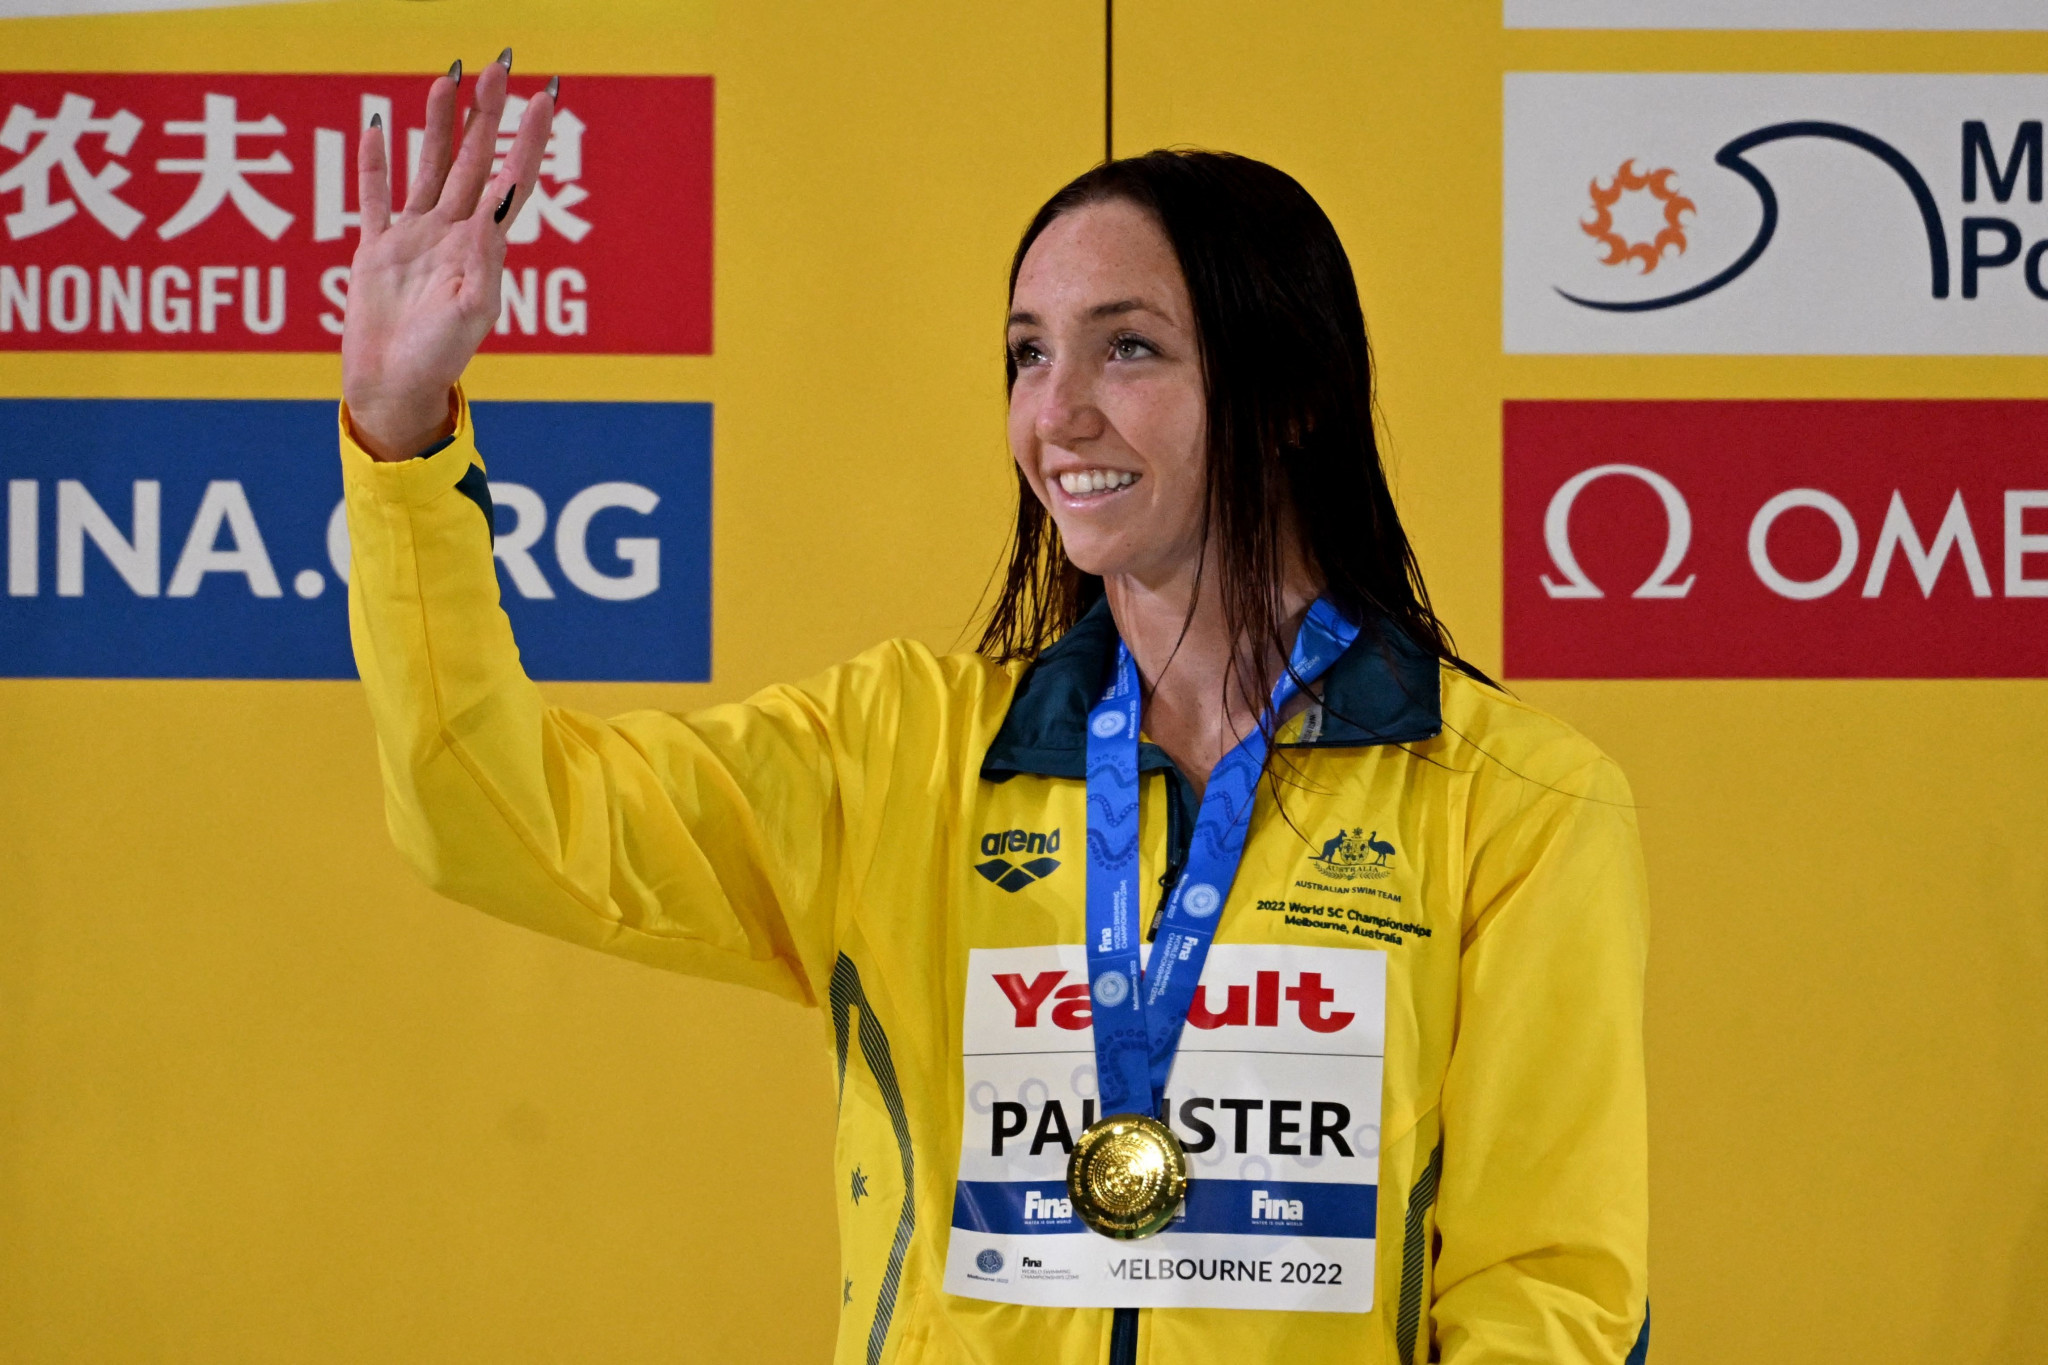 Pallister wins two more golds to seal World Swimming Championships (25m) triple